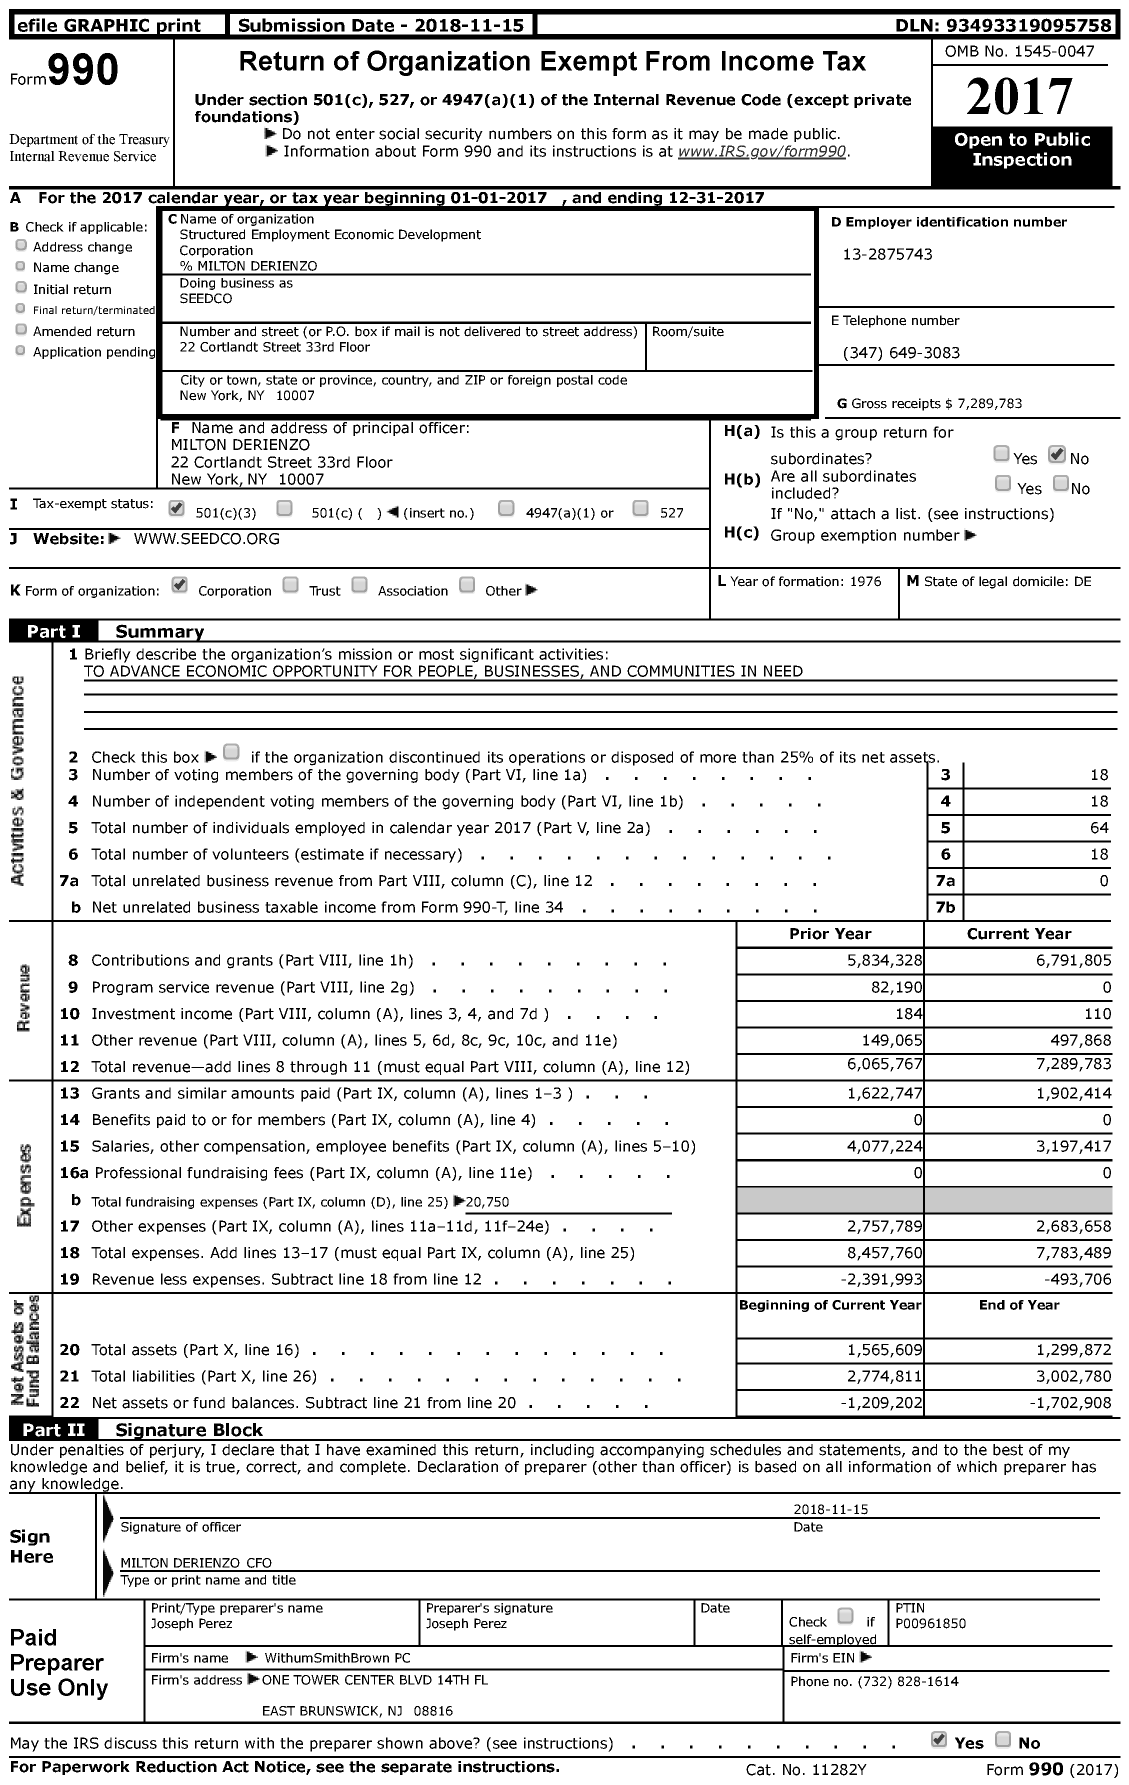 Image of first page of 2017 Form 990 for Structured Employment Economic Development Corporation (SEEDCO)